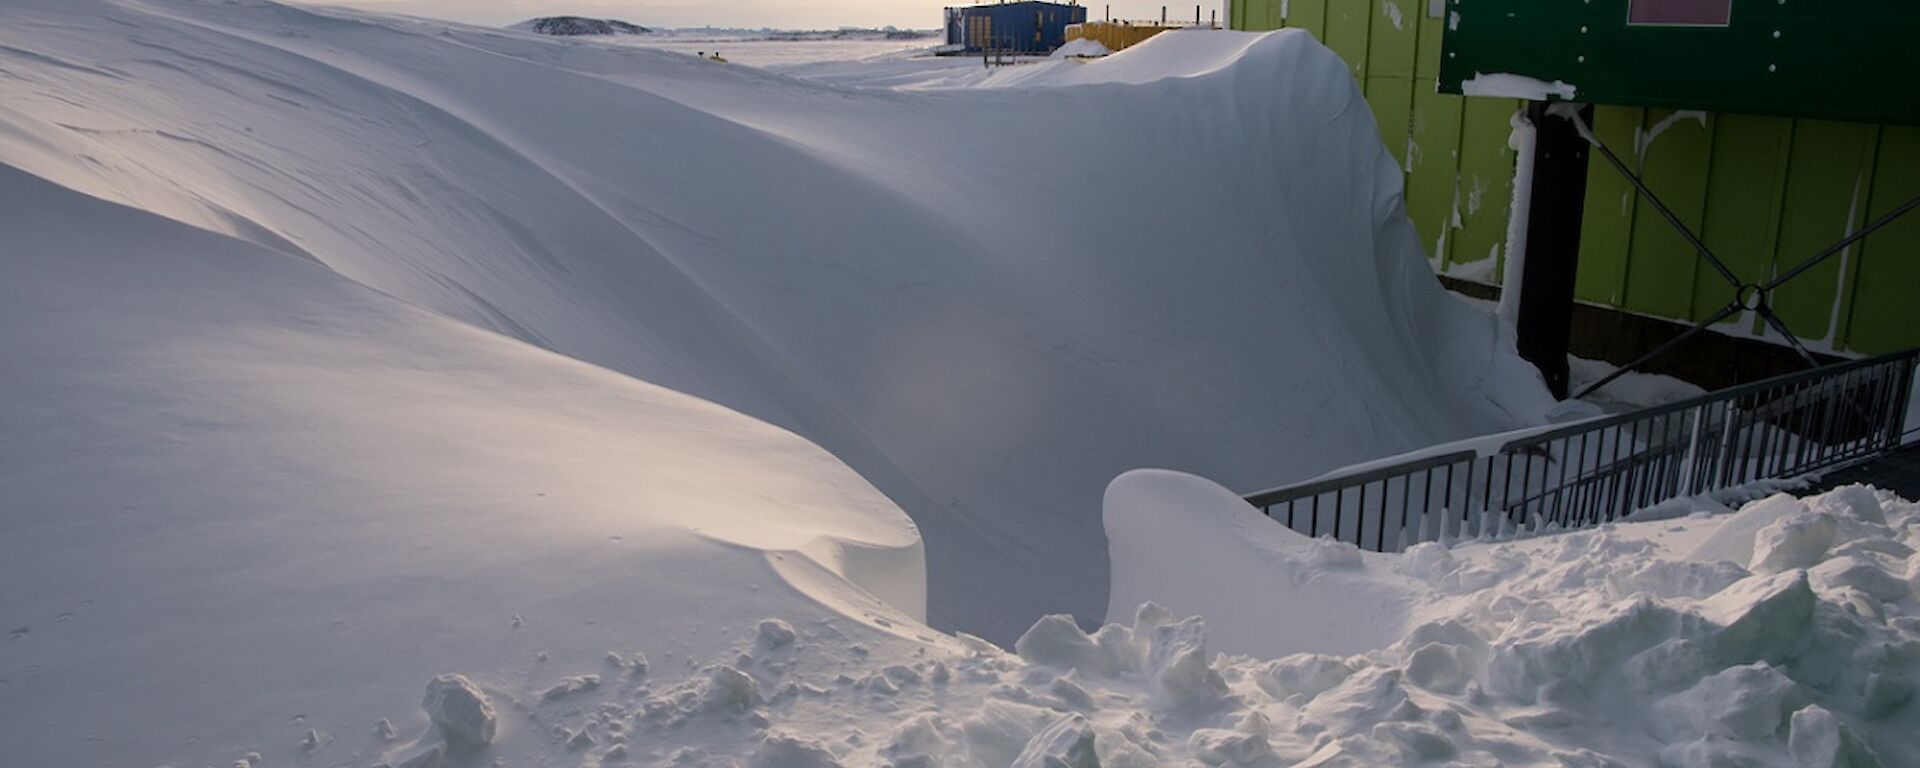 A massive snow dune exists in front of the living quarters building.